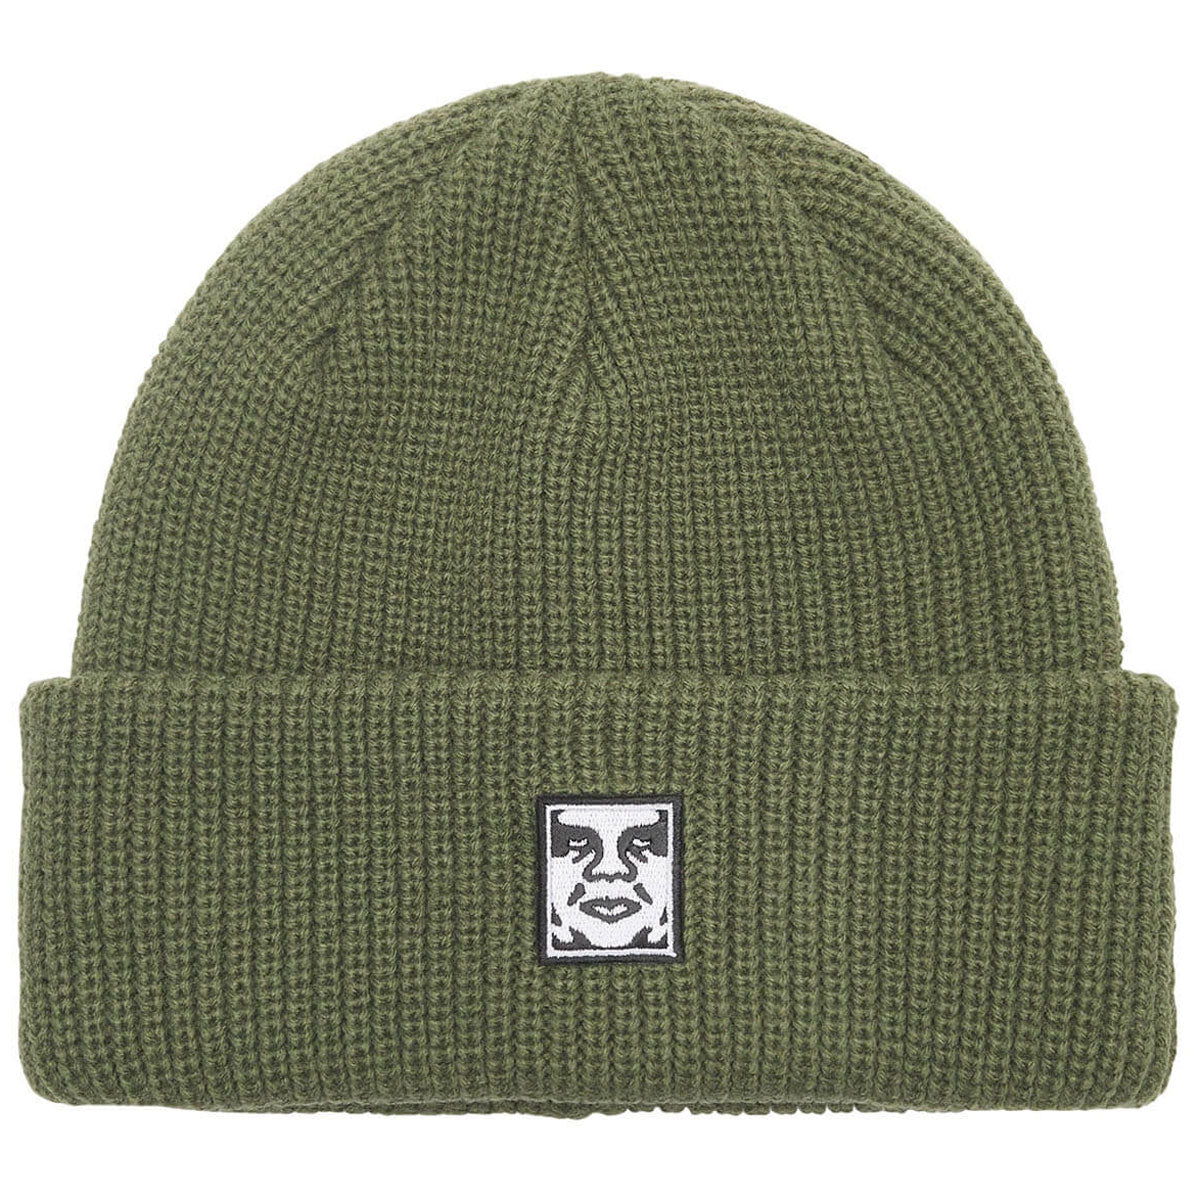 Obey Mid Icon Patch Cuff Beanie - Army image 1